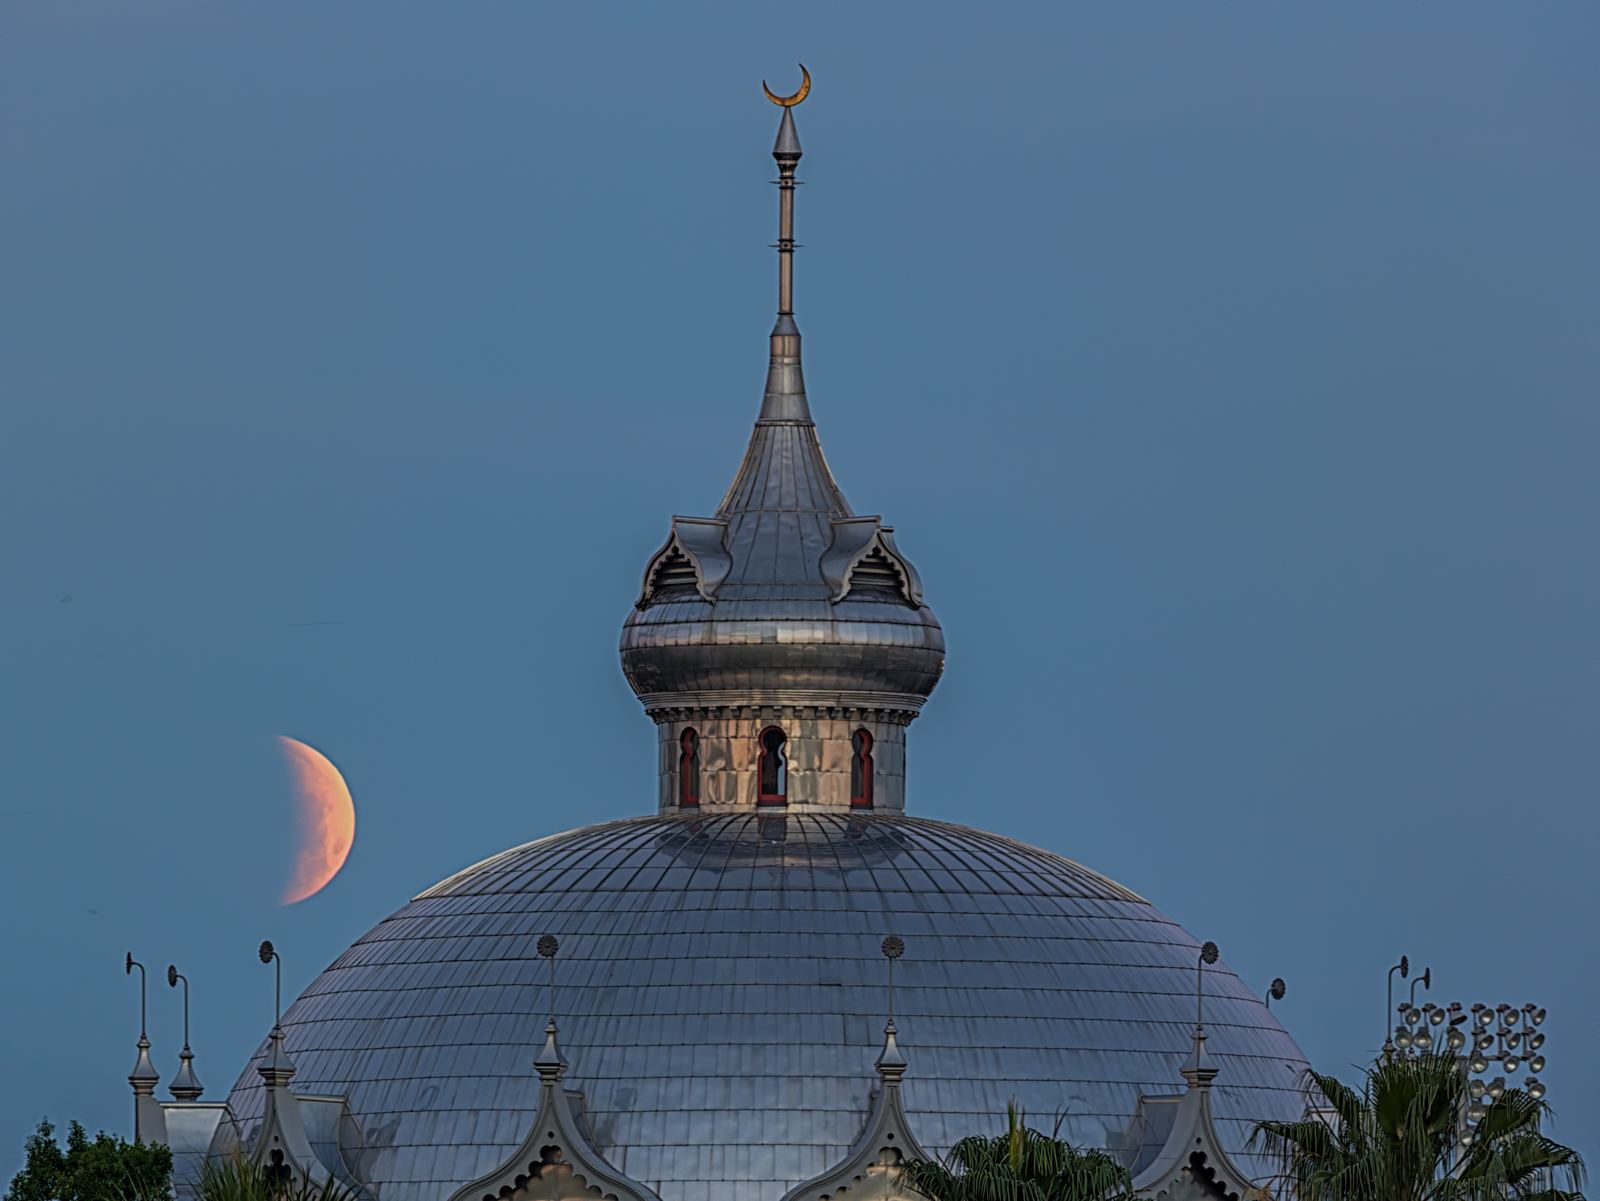 Lunar Eclipse over University of Tampa